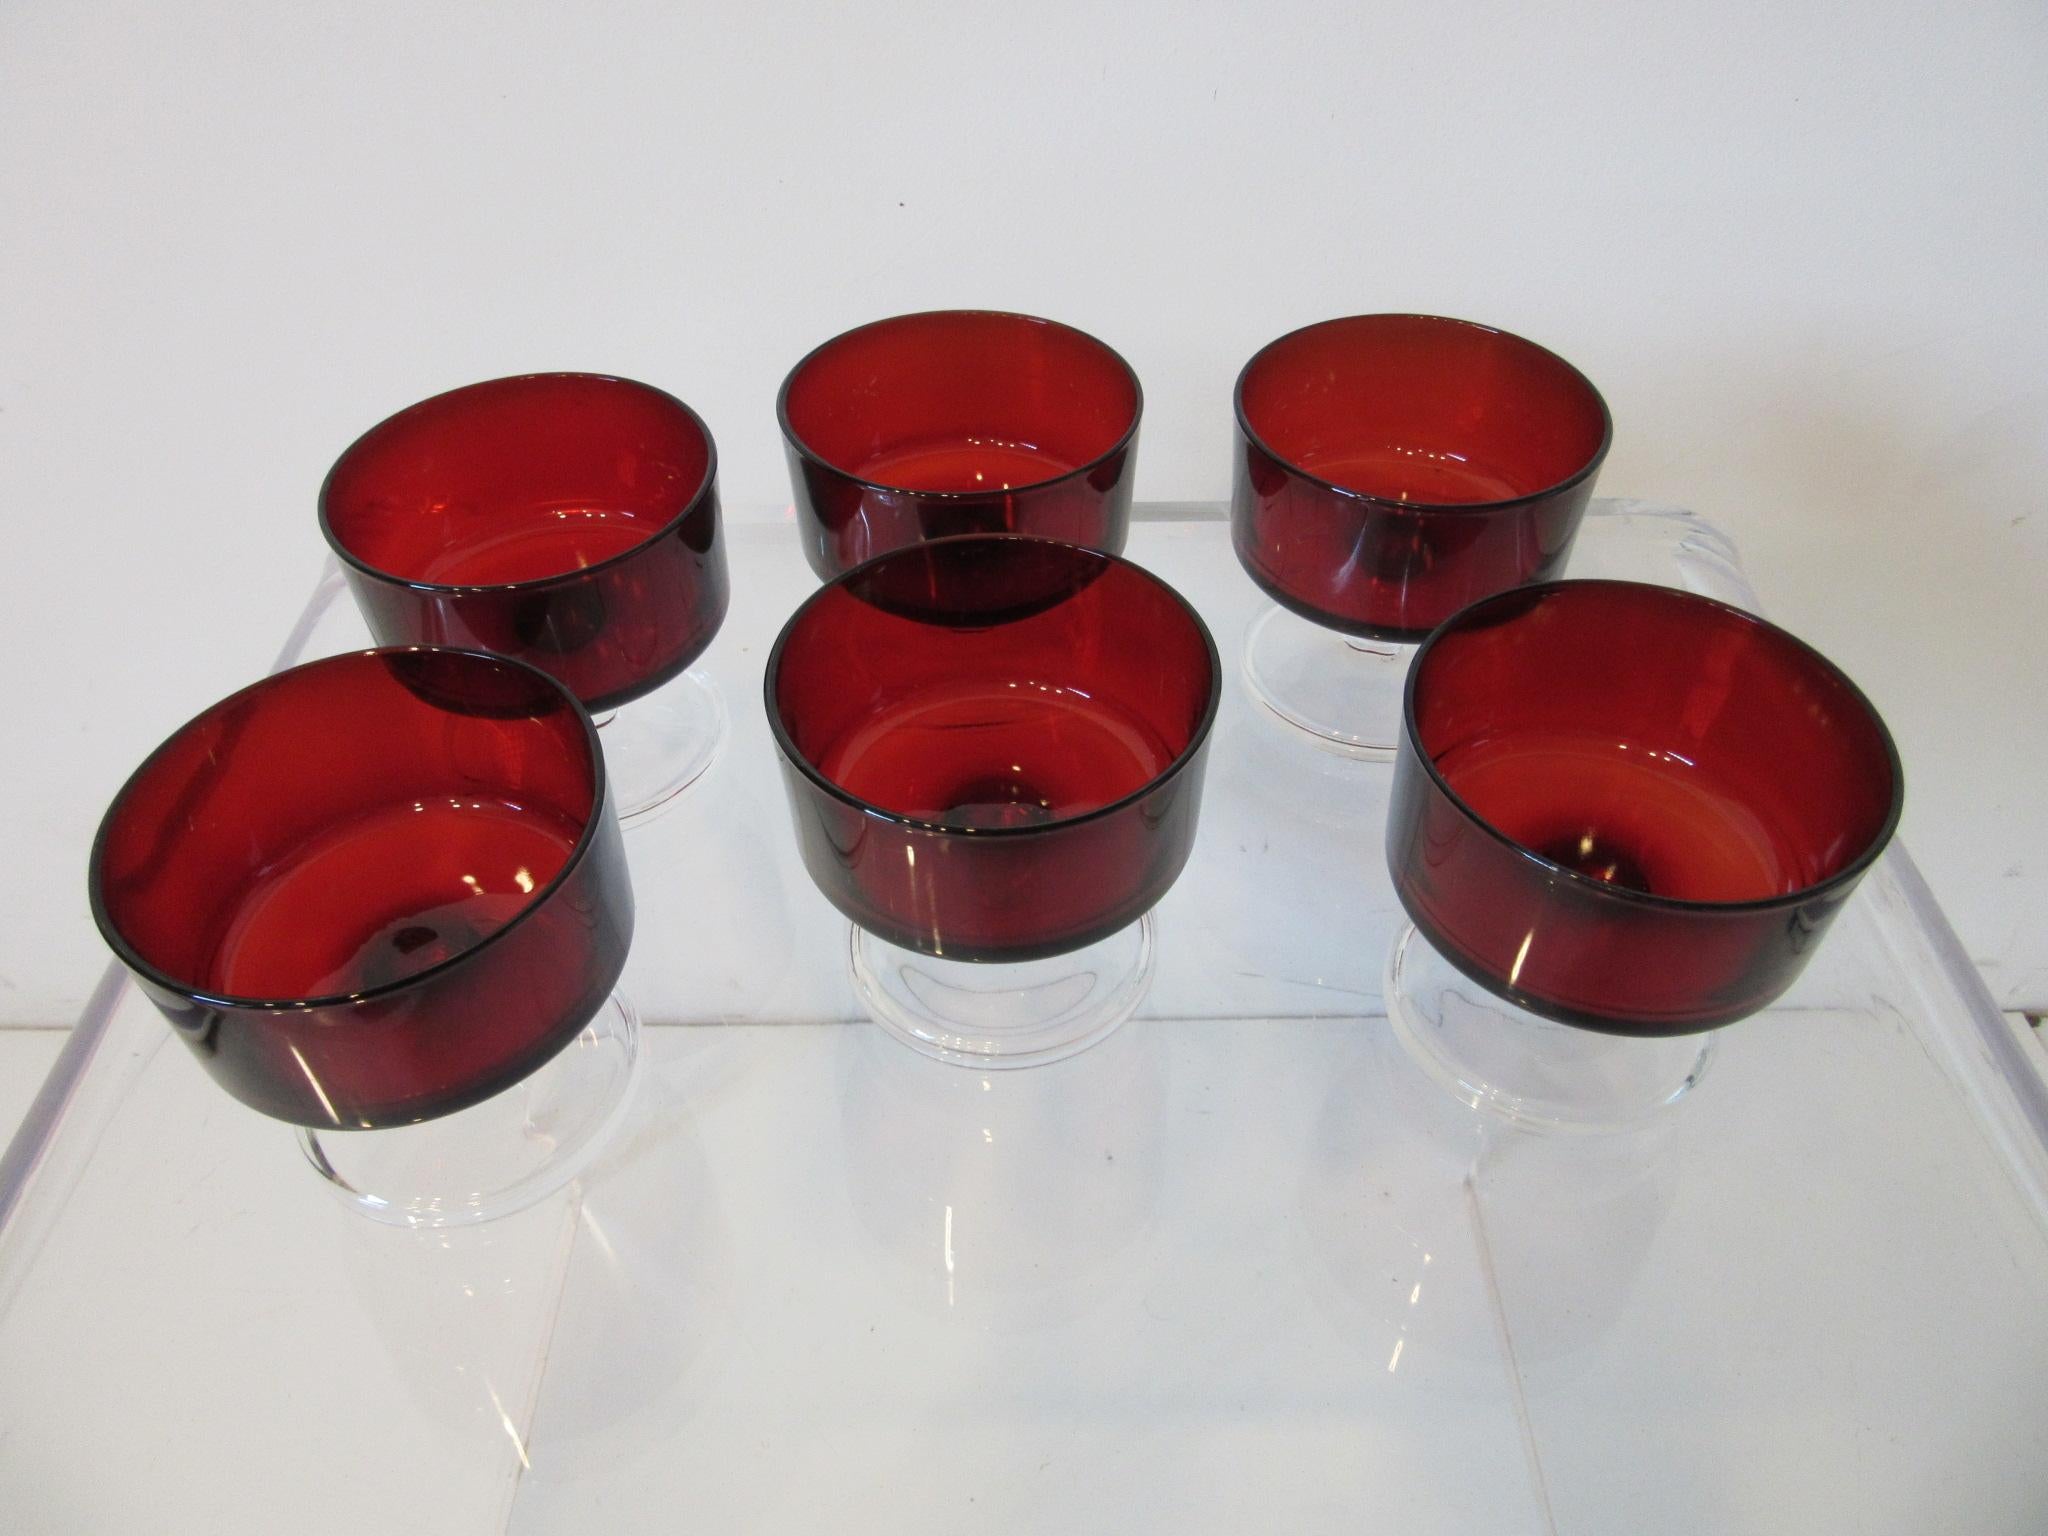 A set of six deep ruby red clear stemmed desert glasses made and marked France, these are perfect for that dinner party giving some color to those white plates or solid color service ware. Heavy well-crafted and they feel very balanced as should